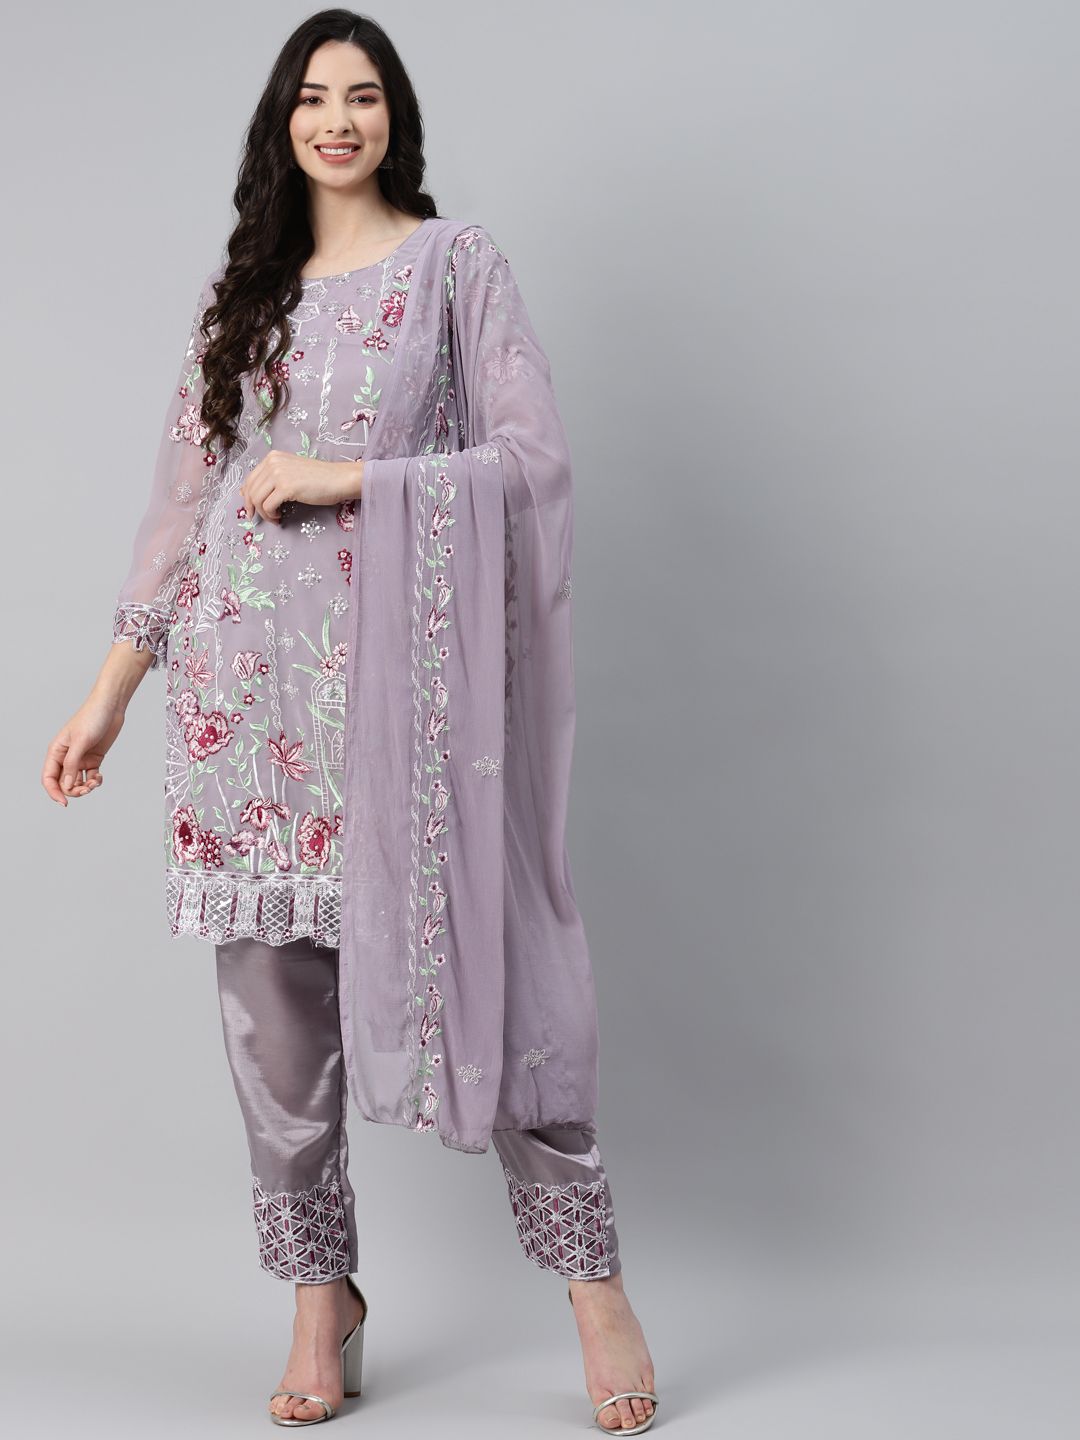 Readiprint Fashions Lavender Embroidered Unstitched Dress Material Price in India